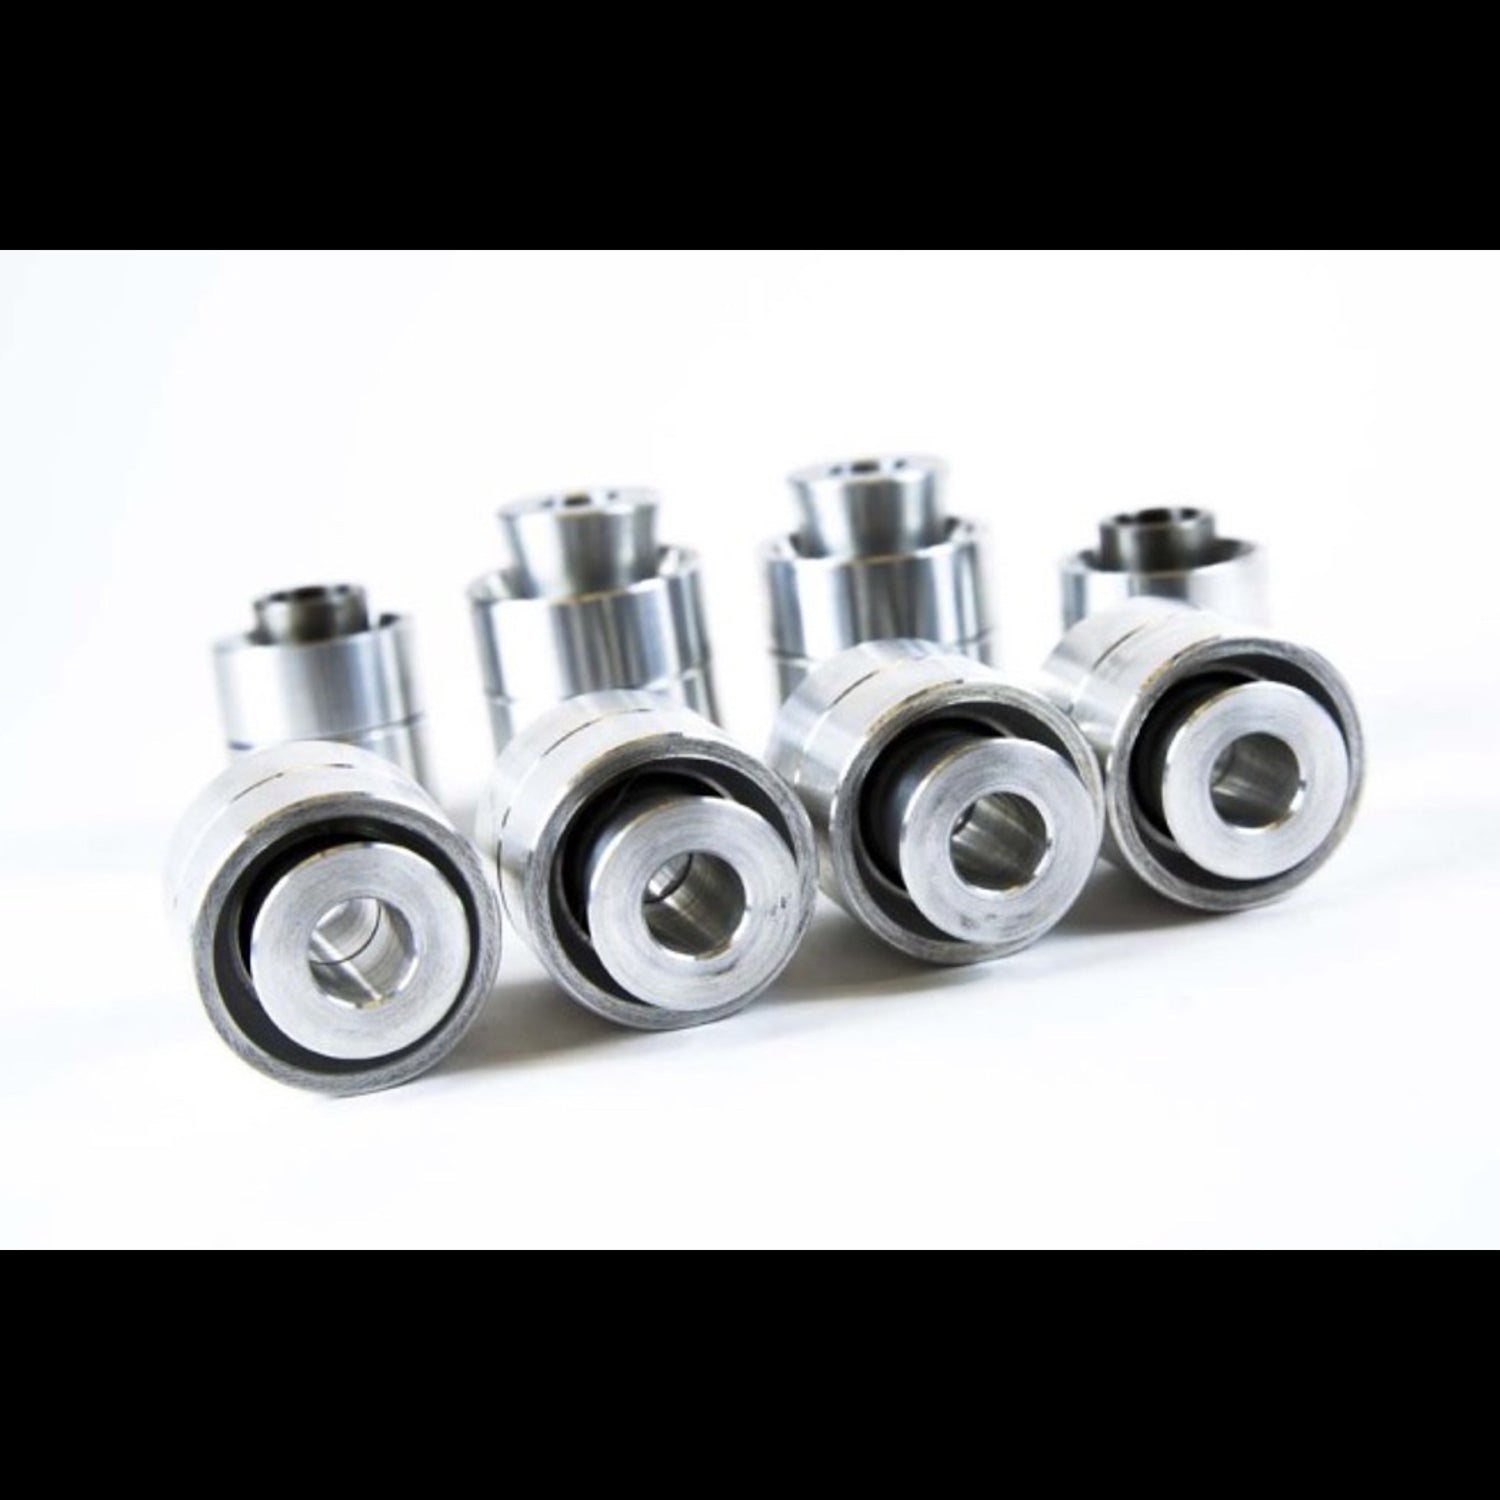 SPL Parts Spherical bushings with white background